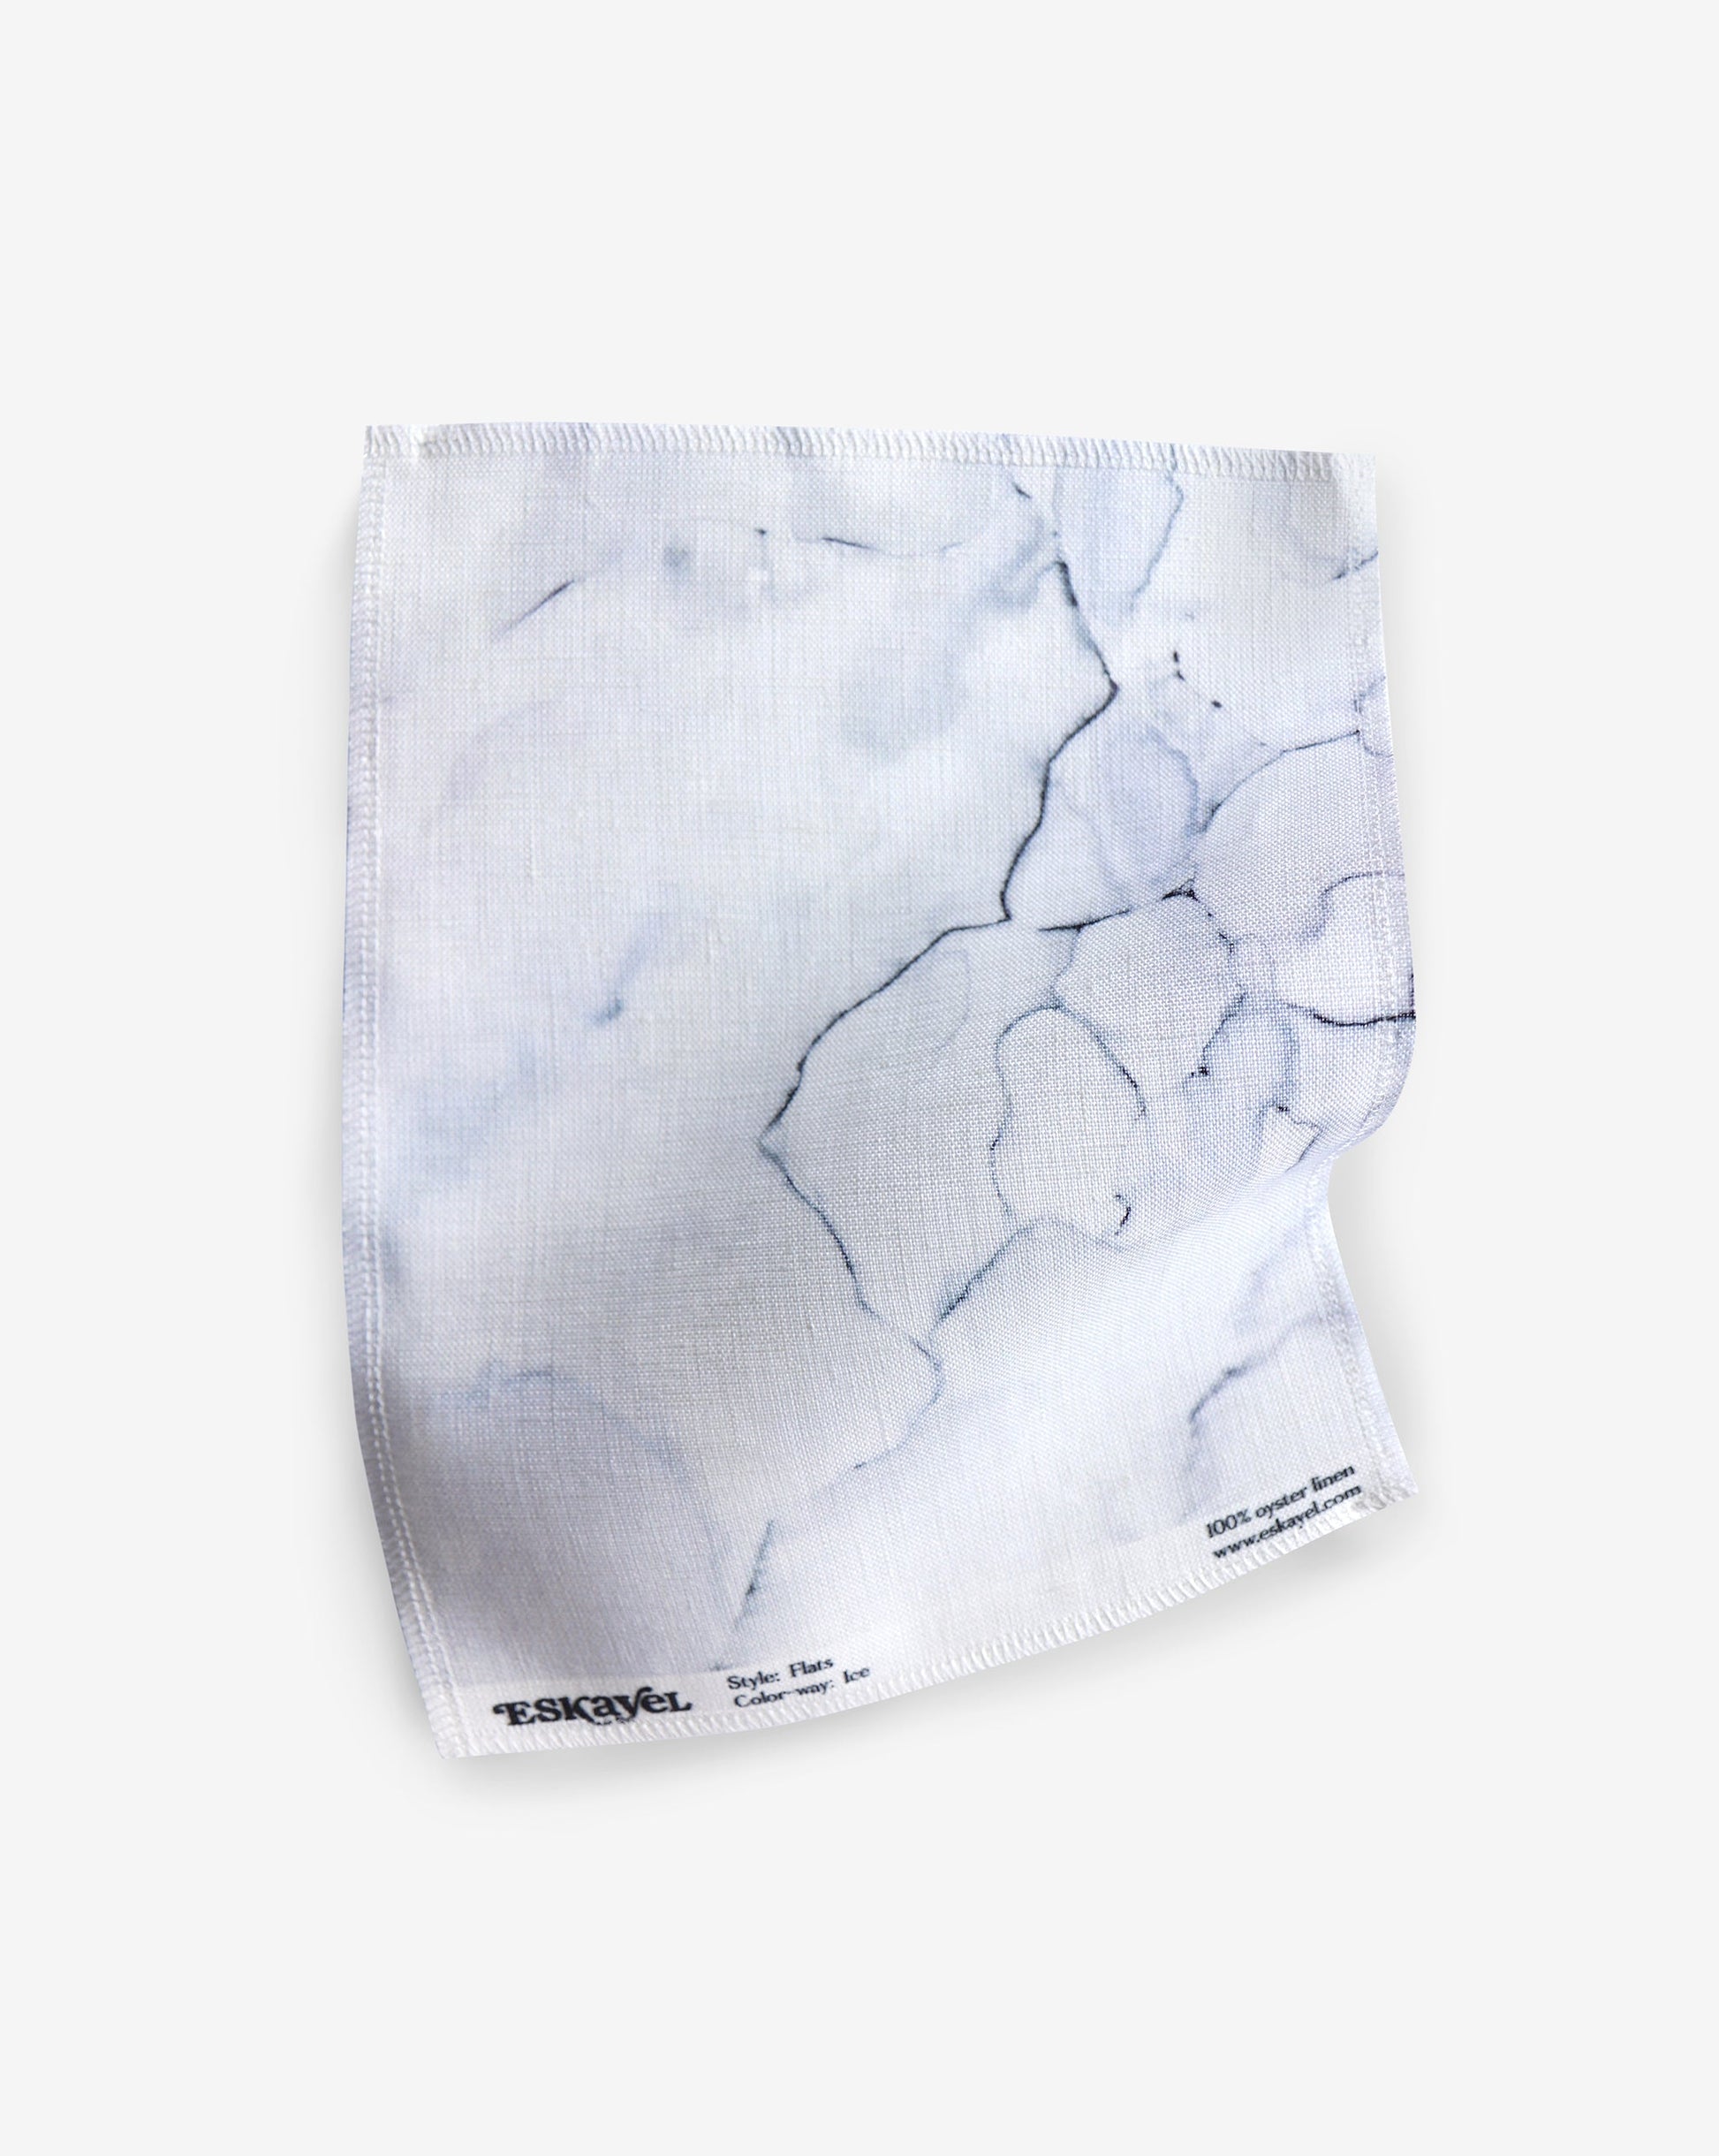 An Aquarelle Fabric Sample||Ice handkerchief with a marble pattern on it.